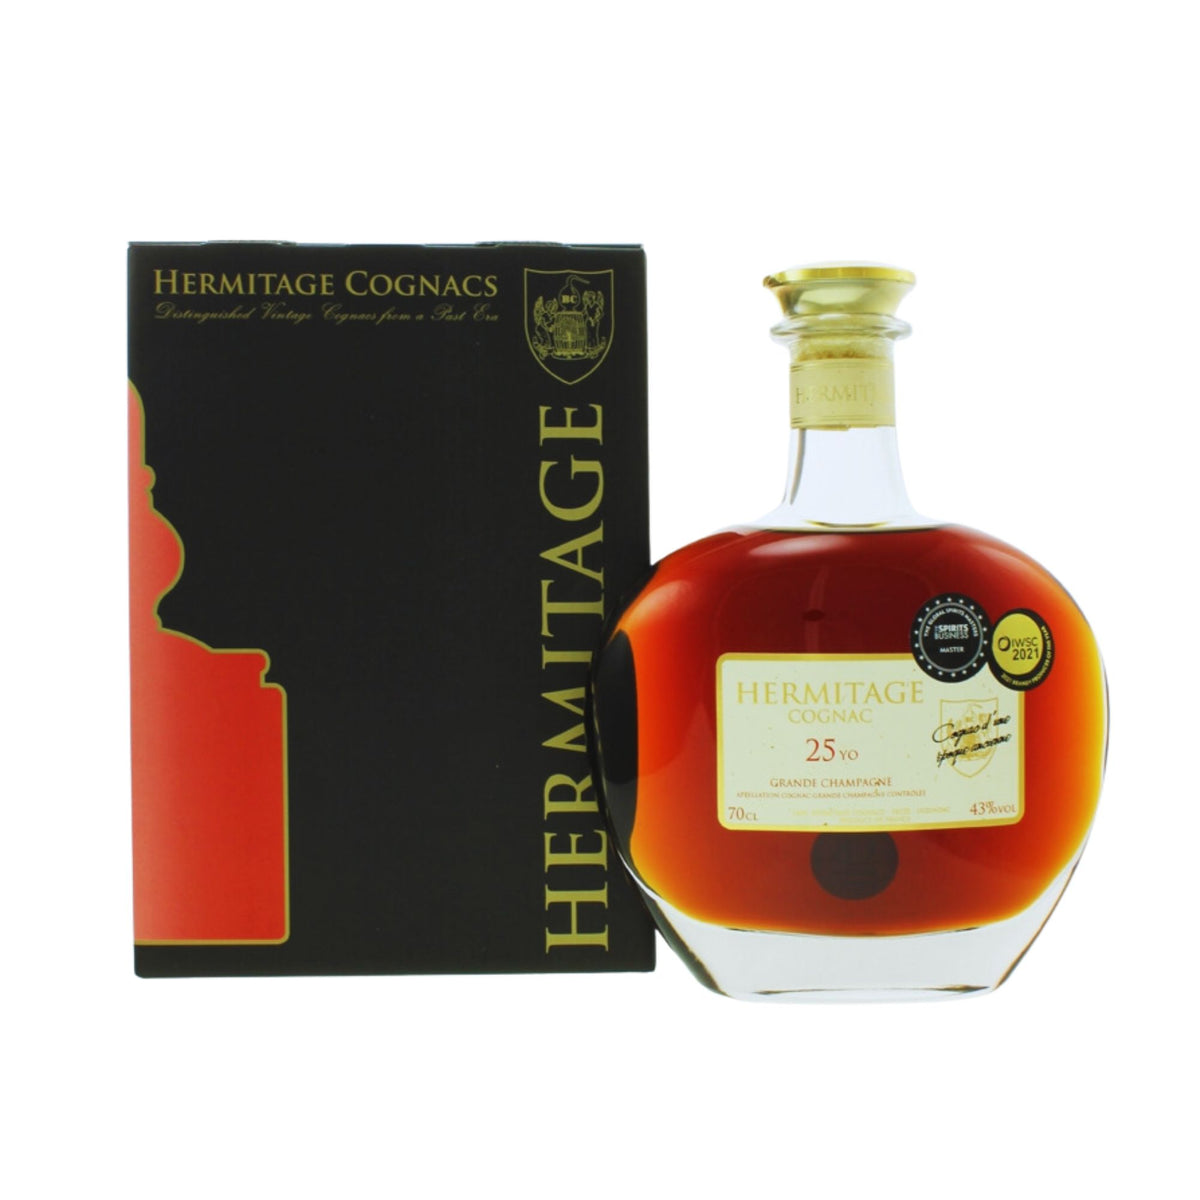 Hermitage 25-Year-Old Grand Champagne Cognac, 43%